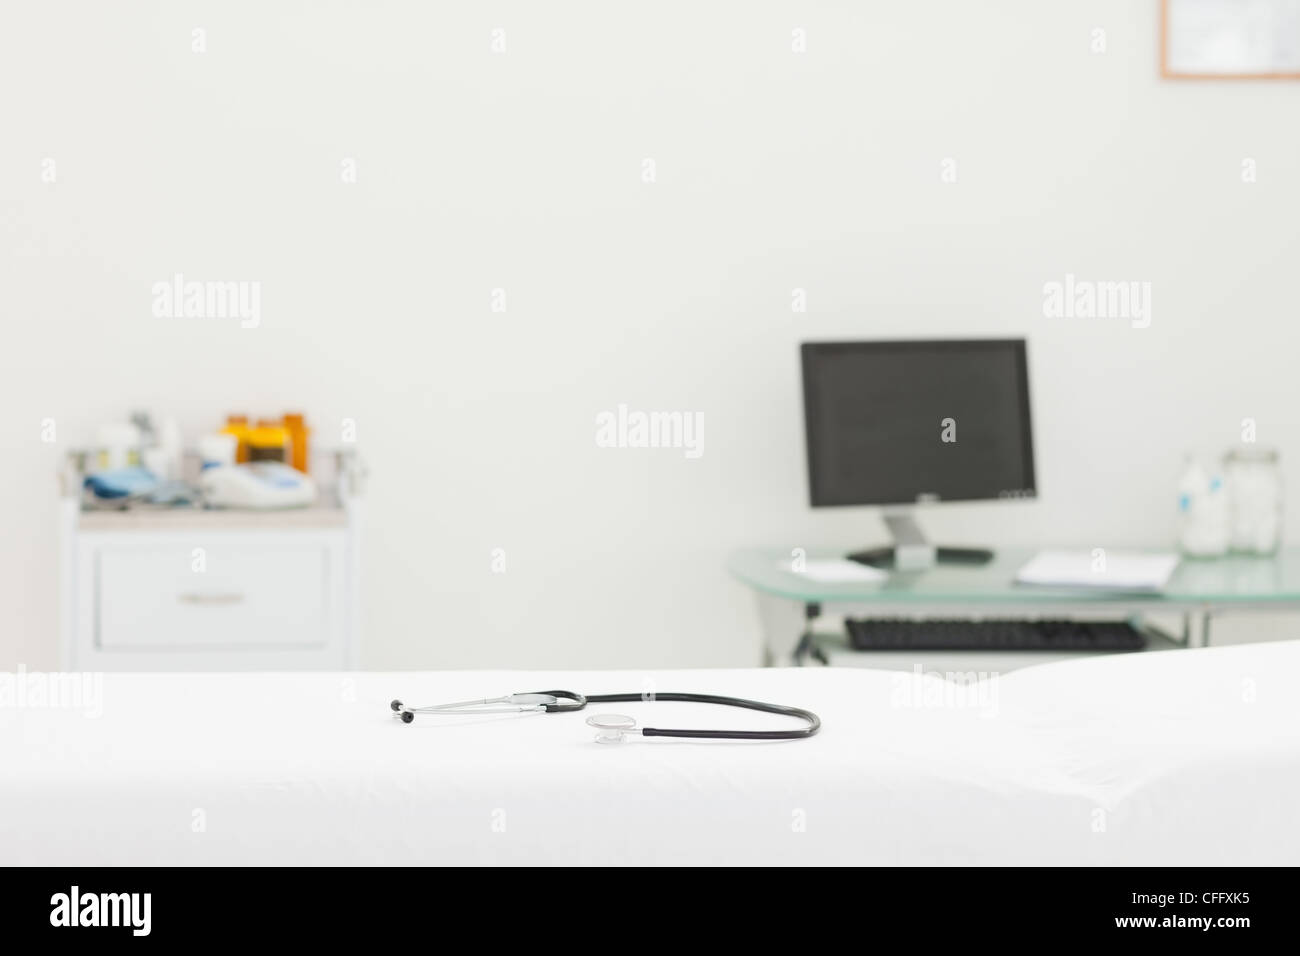 Stethoscope lying on mattress in an examination room Stock Photo